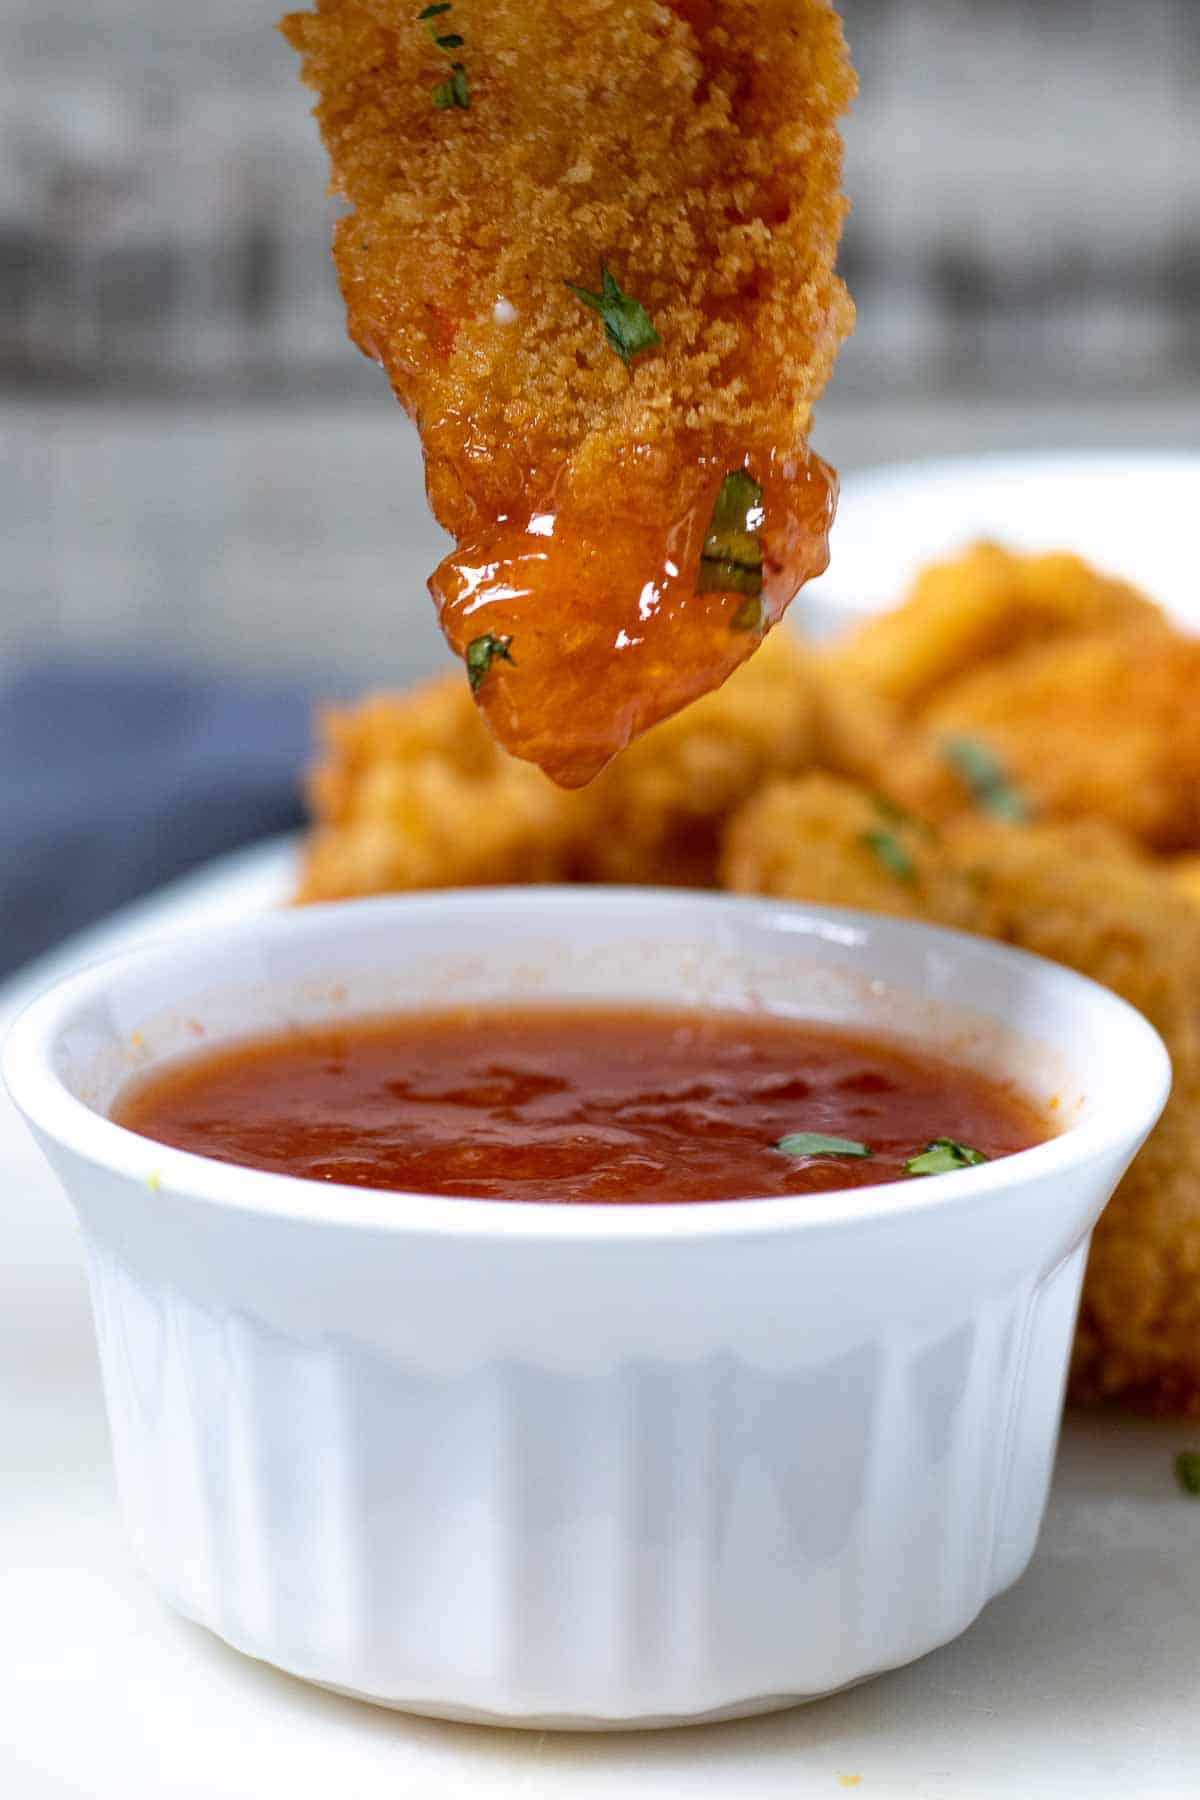 Butterflied shrimp dipped into sweet chili sauce.